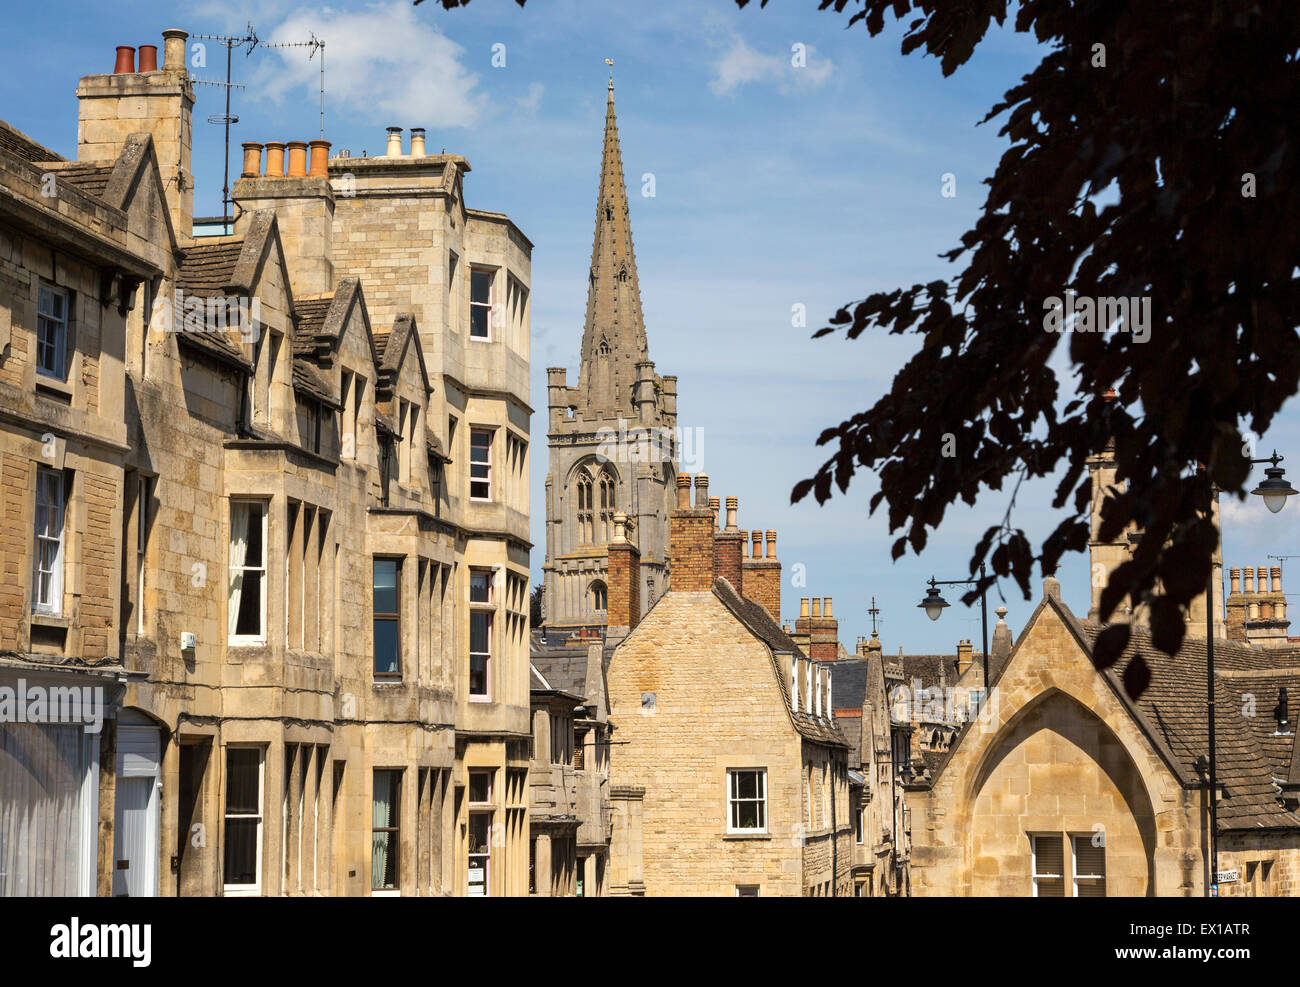 All Saints church spire and buildings in Stamford, Lincolnshire, England, UK Stock Photo